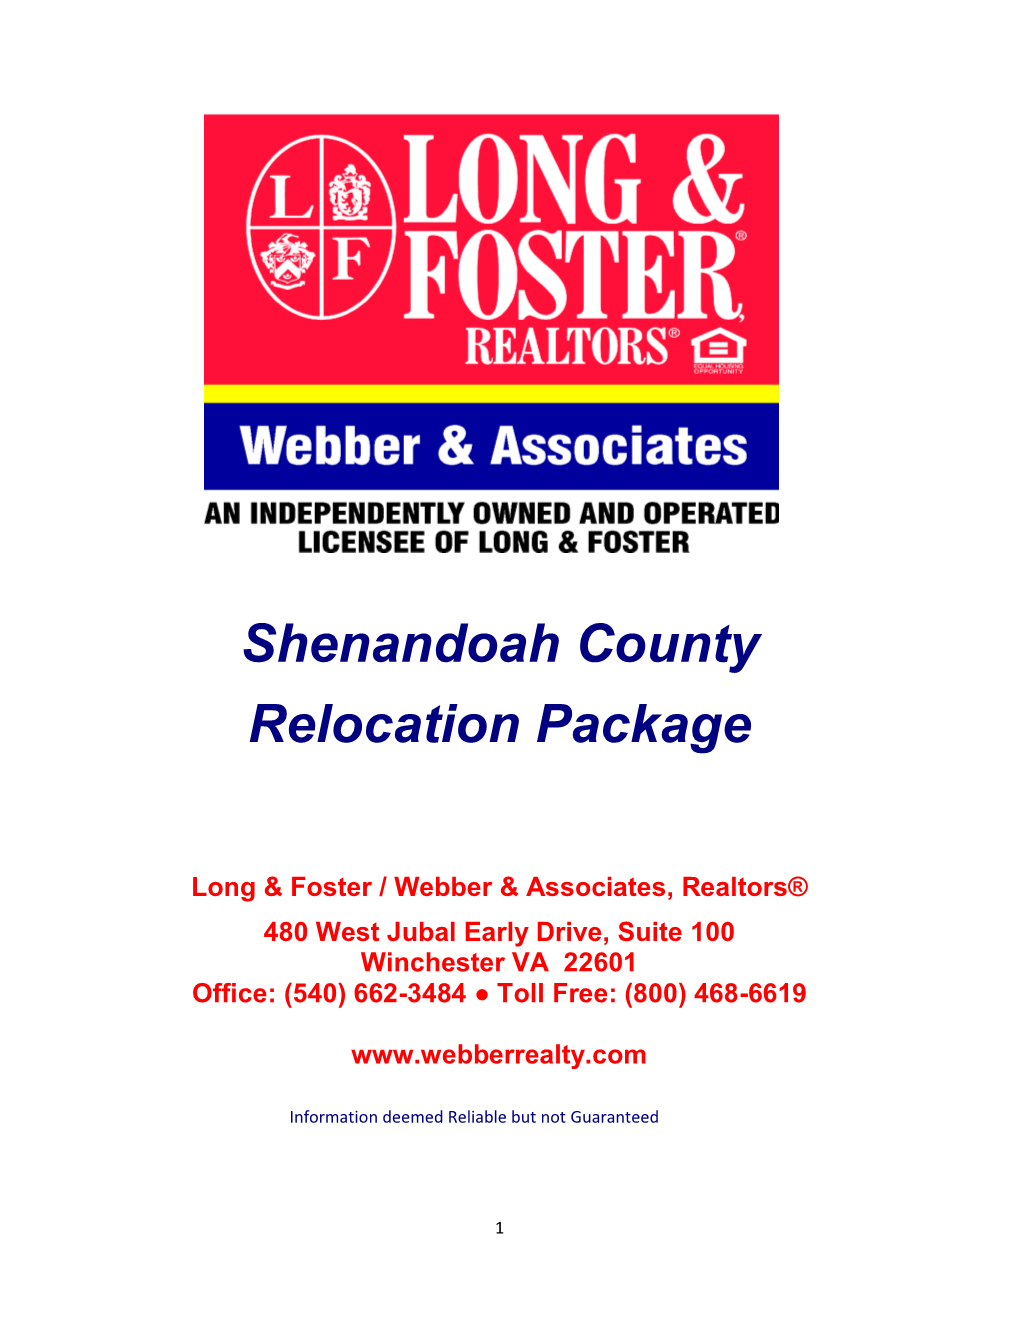 Shenandoah County Relocation Package